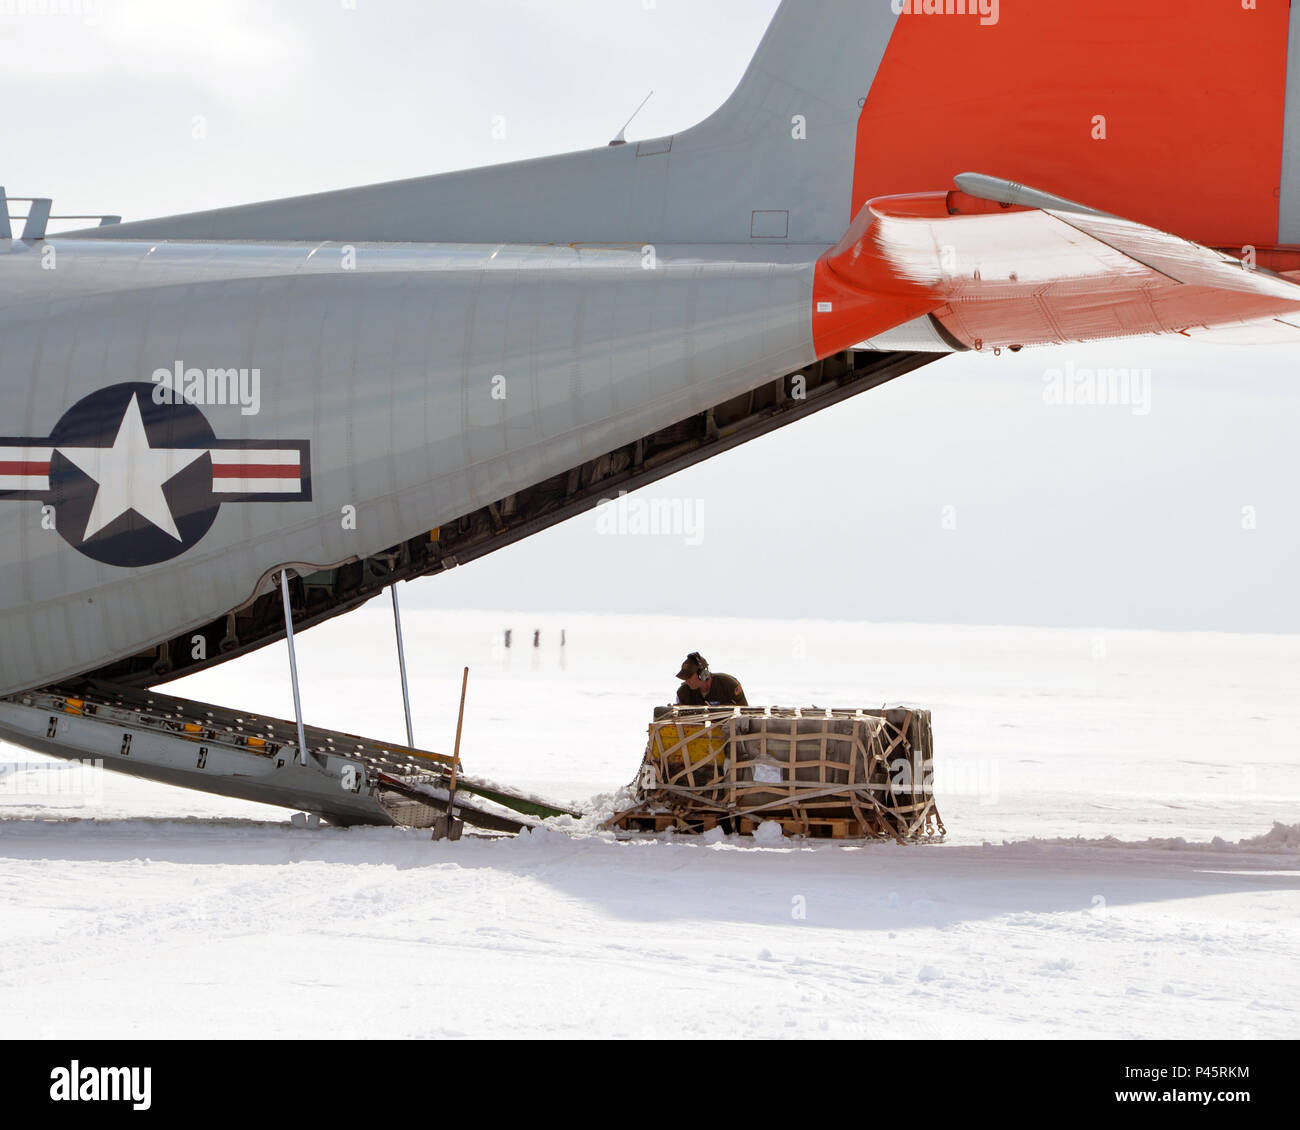 New York Air National Guard Staff Sgt. Matthew Jones, 109th Airlift Wing LC-130 'Skibird' Loadmaster clears snow from a pallet being uploaded onto a LC-130 'Skibird at Camp Raven, Greenland, on June 28, 2016.An LC-130 'Skibird' from the New York Air National Guard's 109th Airlift Wing in Scotia, New York, lands at Camp Raven, Greenland, near the DYE-2 site, on June 28, 2016. Crews with the 109th AW use Camp Raven as a training site for landing the ski-equipped LC-130s on snow and ice. Four LC-130s and  80 Airmen from the Wing recently completed the third rotation of the 2016 Greenland season. Stock Photo